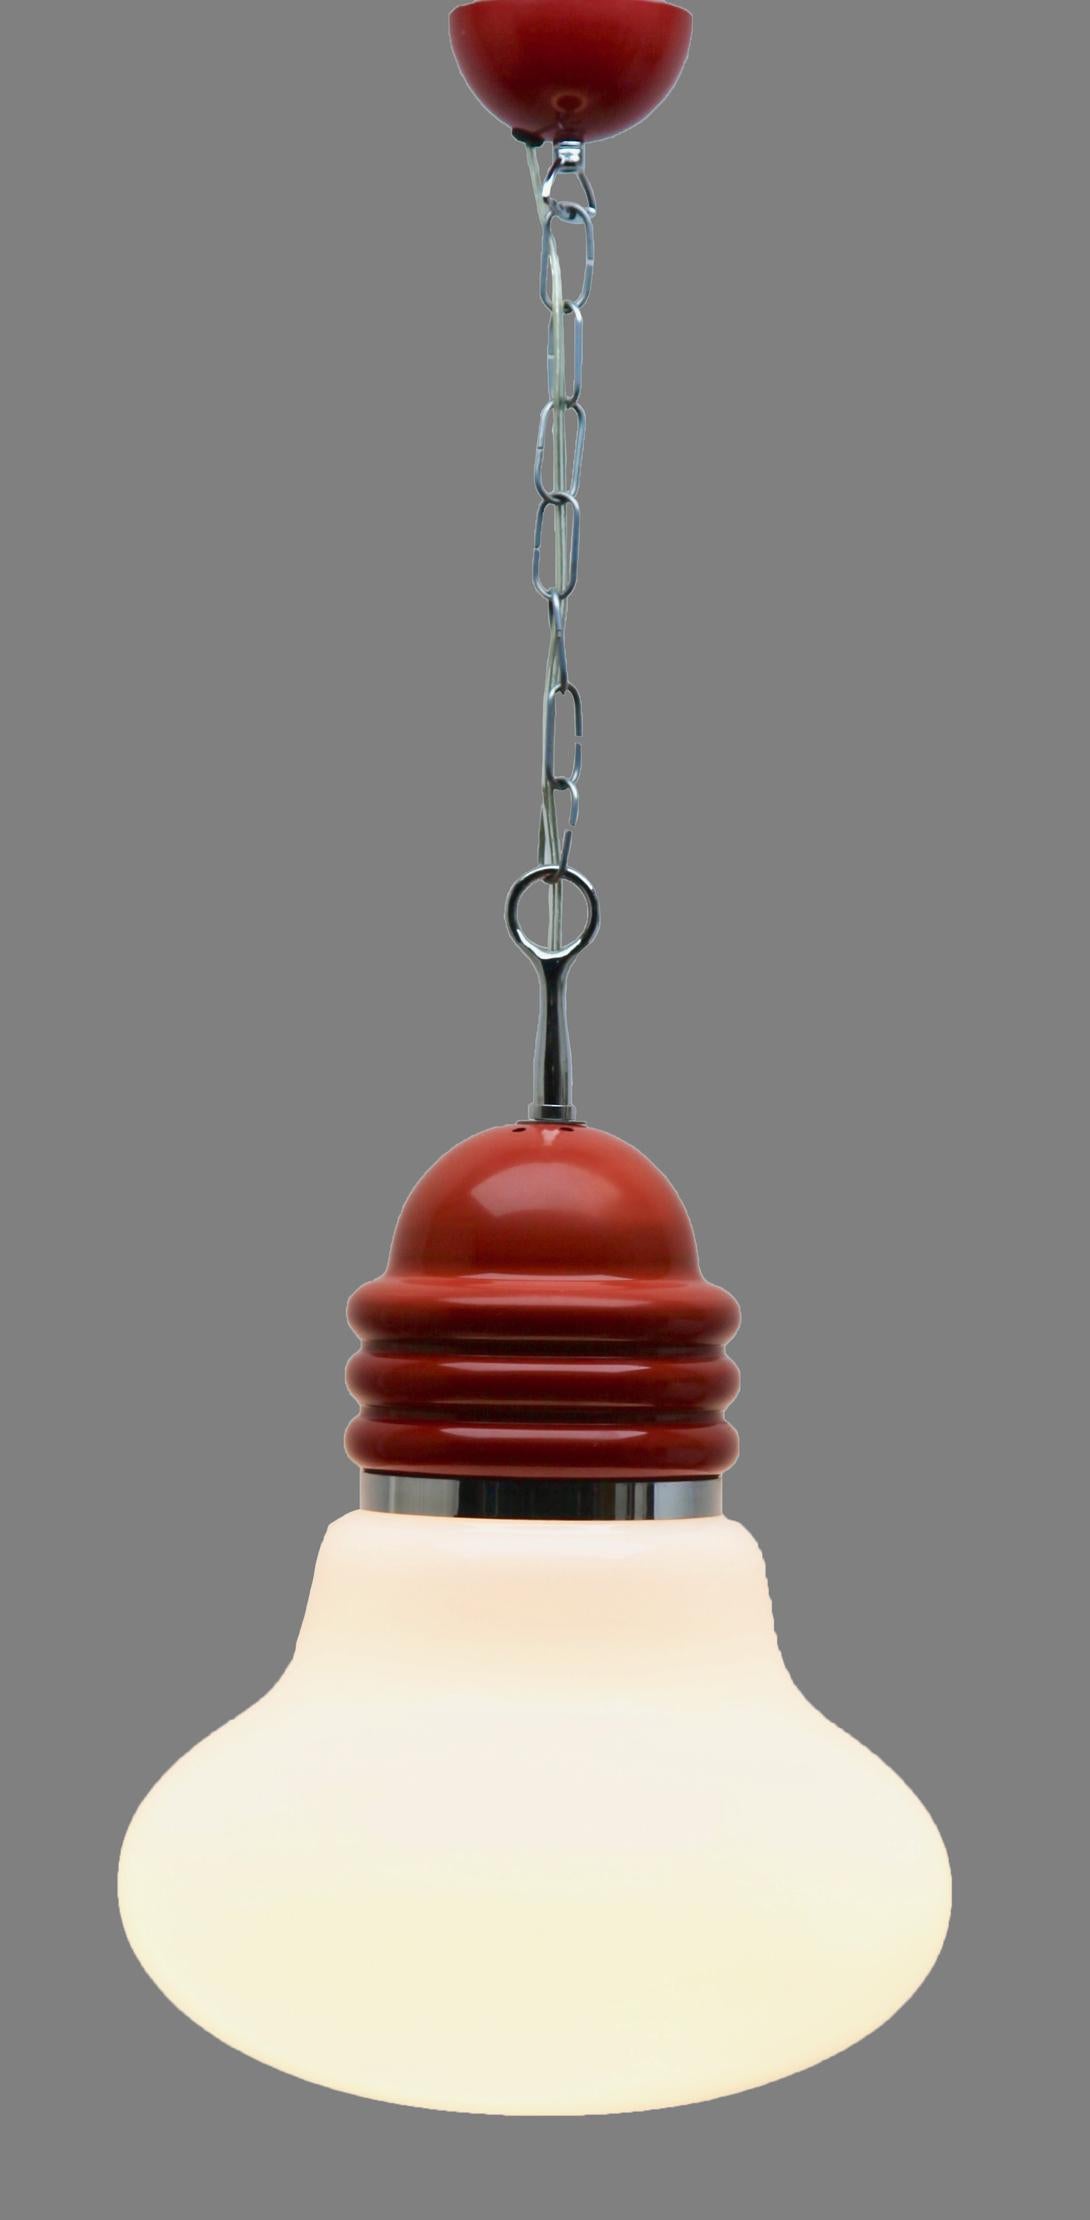 Opaque glass Art Deco pendant ceiling light with glass shade and 1 new fitting E27
This simple 'hanging' shape and reflects a soft light over a wide area.
Adjustable in height.
As service: We can adjust the lamp height for you in advance if needed.